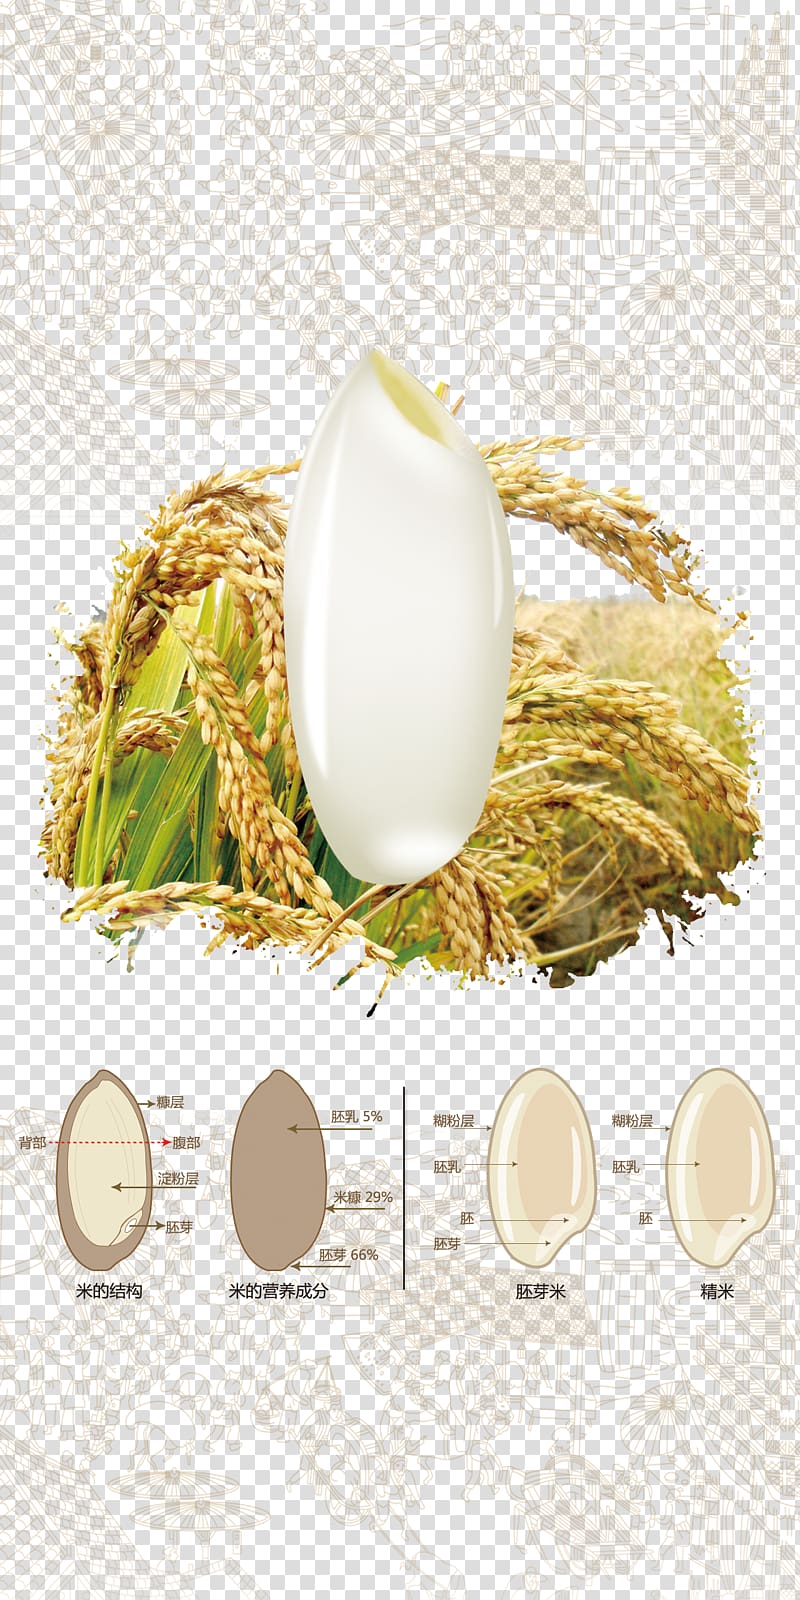 Oryza sativa Rice Cereal Paddy Field, Rice particles transparent background PNG clipart